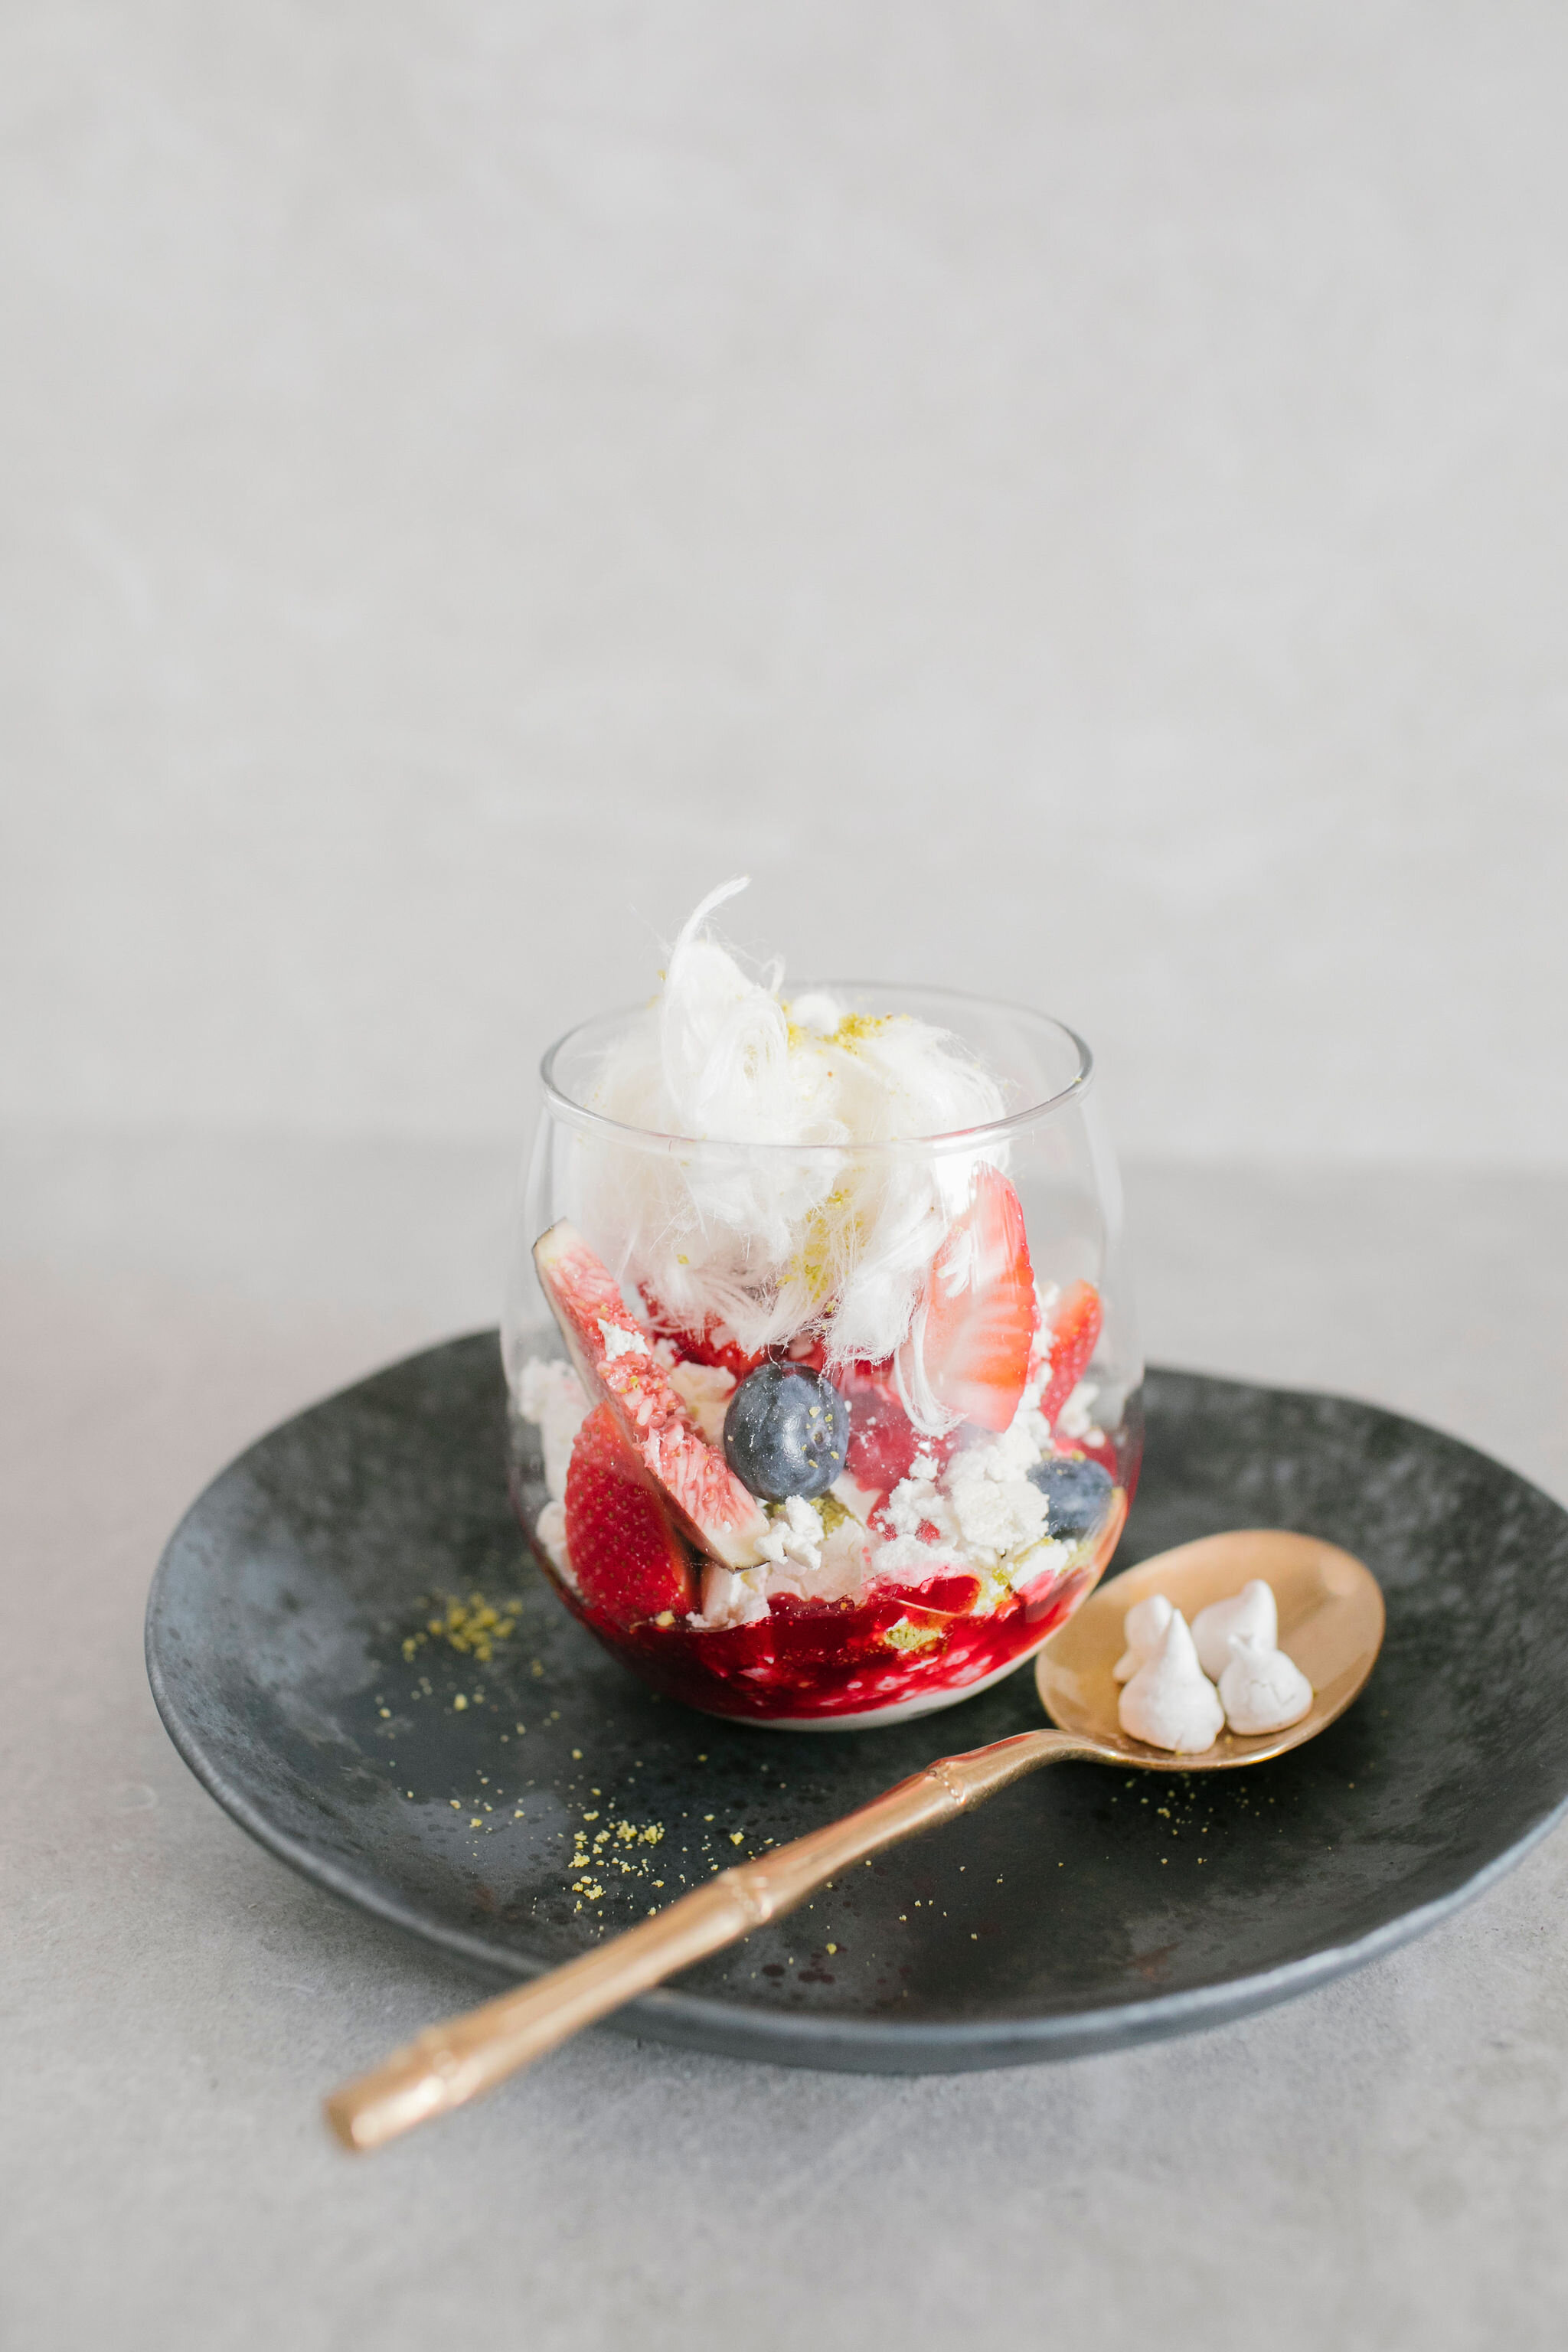 Eton mess in a glass with summer fruits in berry coulis, black fig and pistachio fairy floss plated.jpg